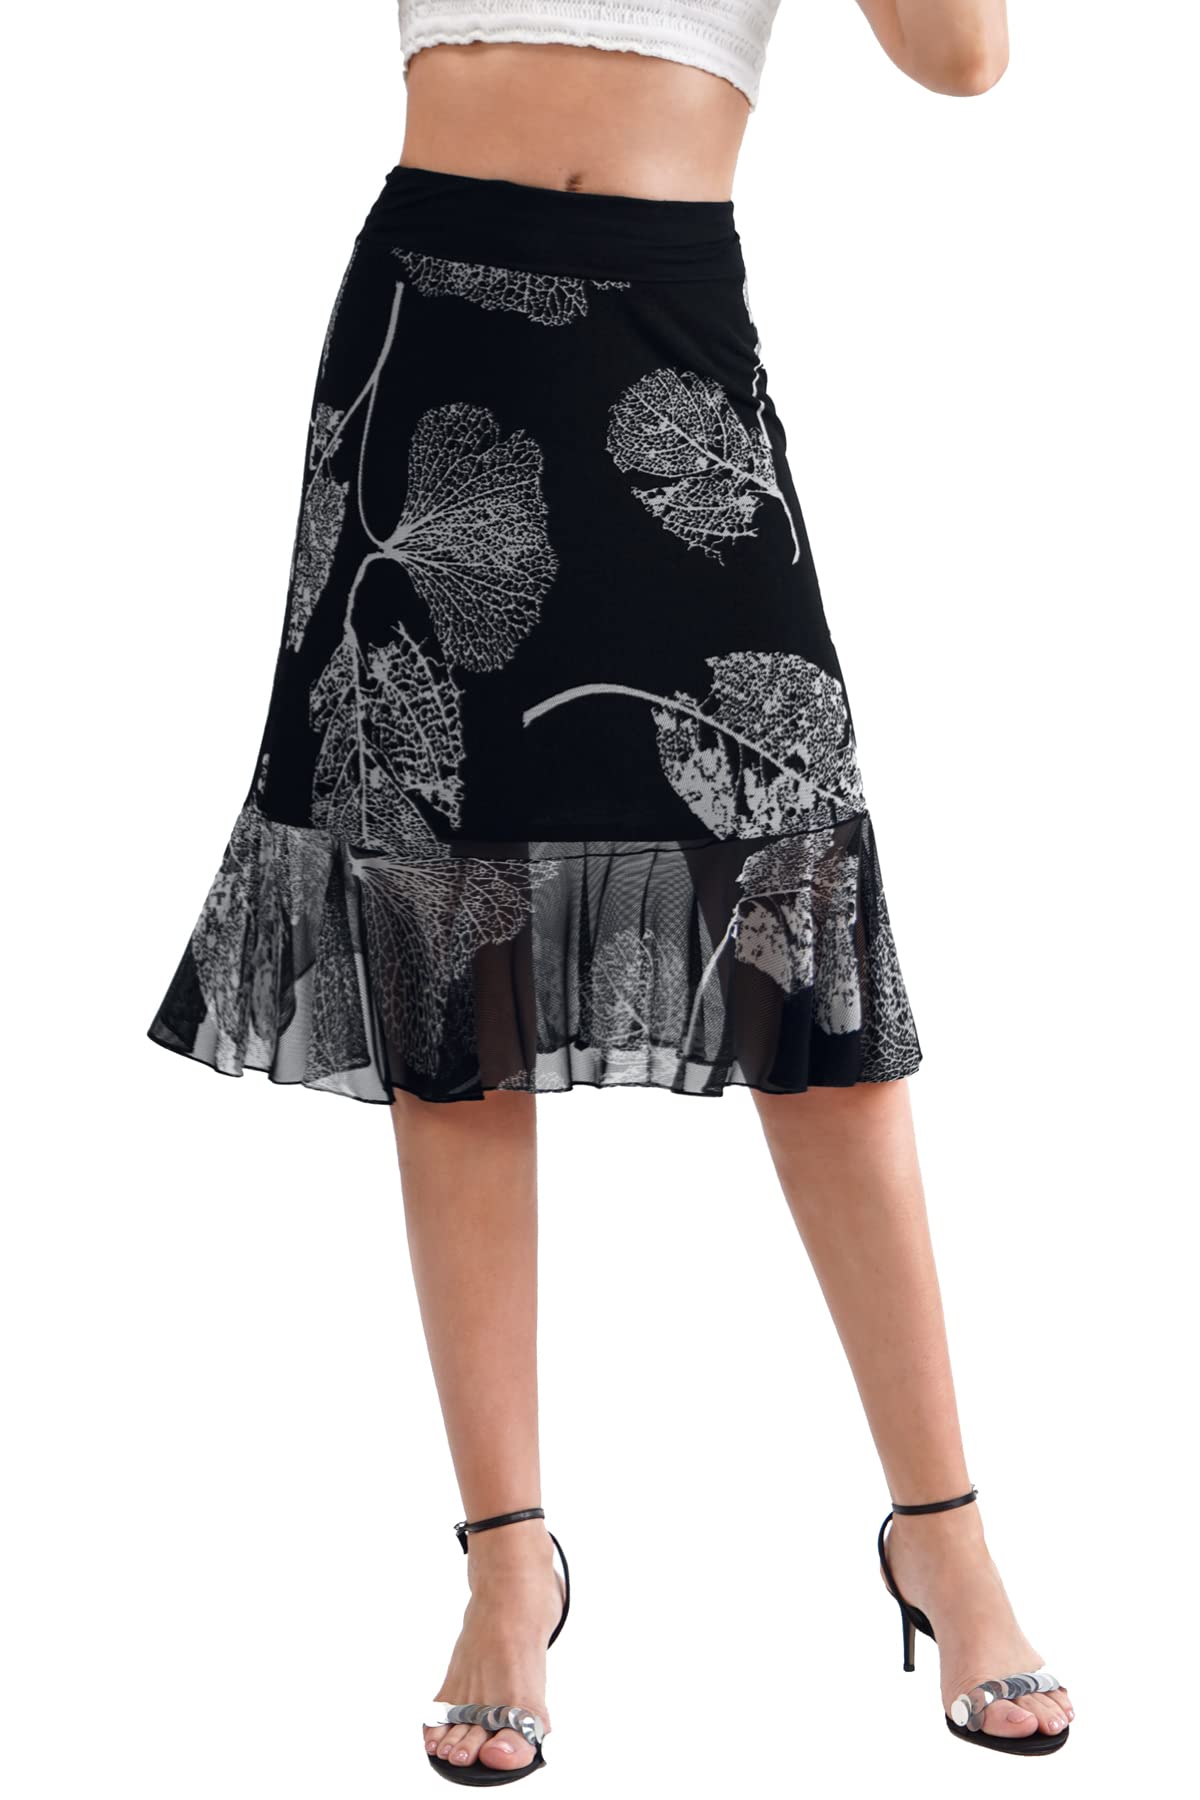 BAISHENGGT Black Leaves Womens Summer High Waisted Ruched Mesh Skirt Floral Layers Ruffled Hem Flowy Swing Midi Skirts